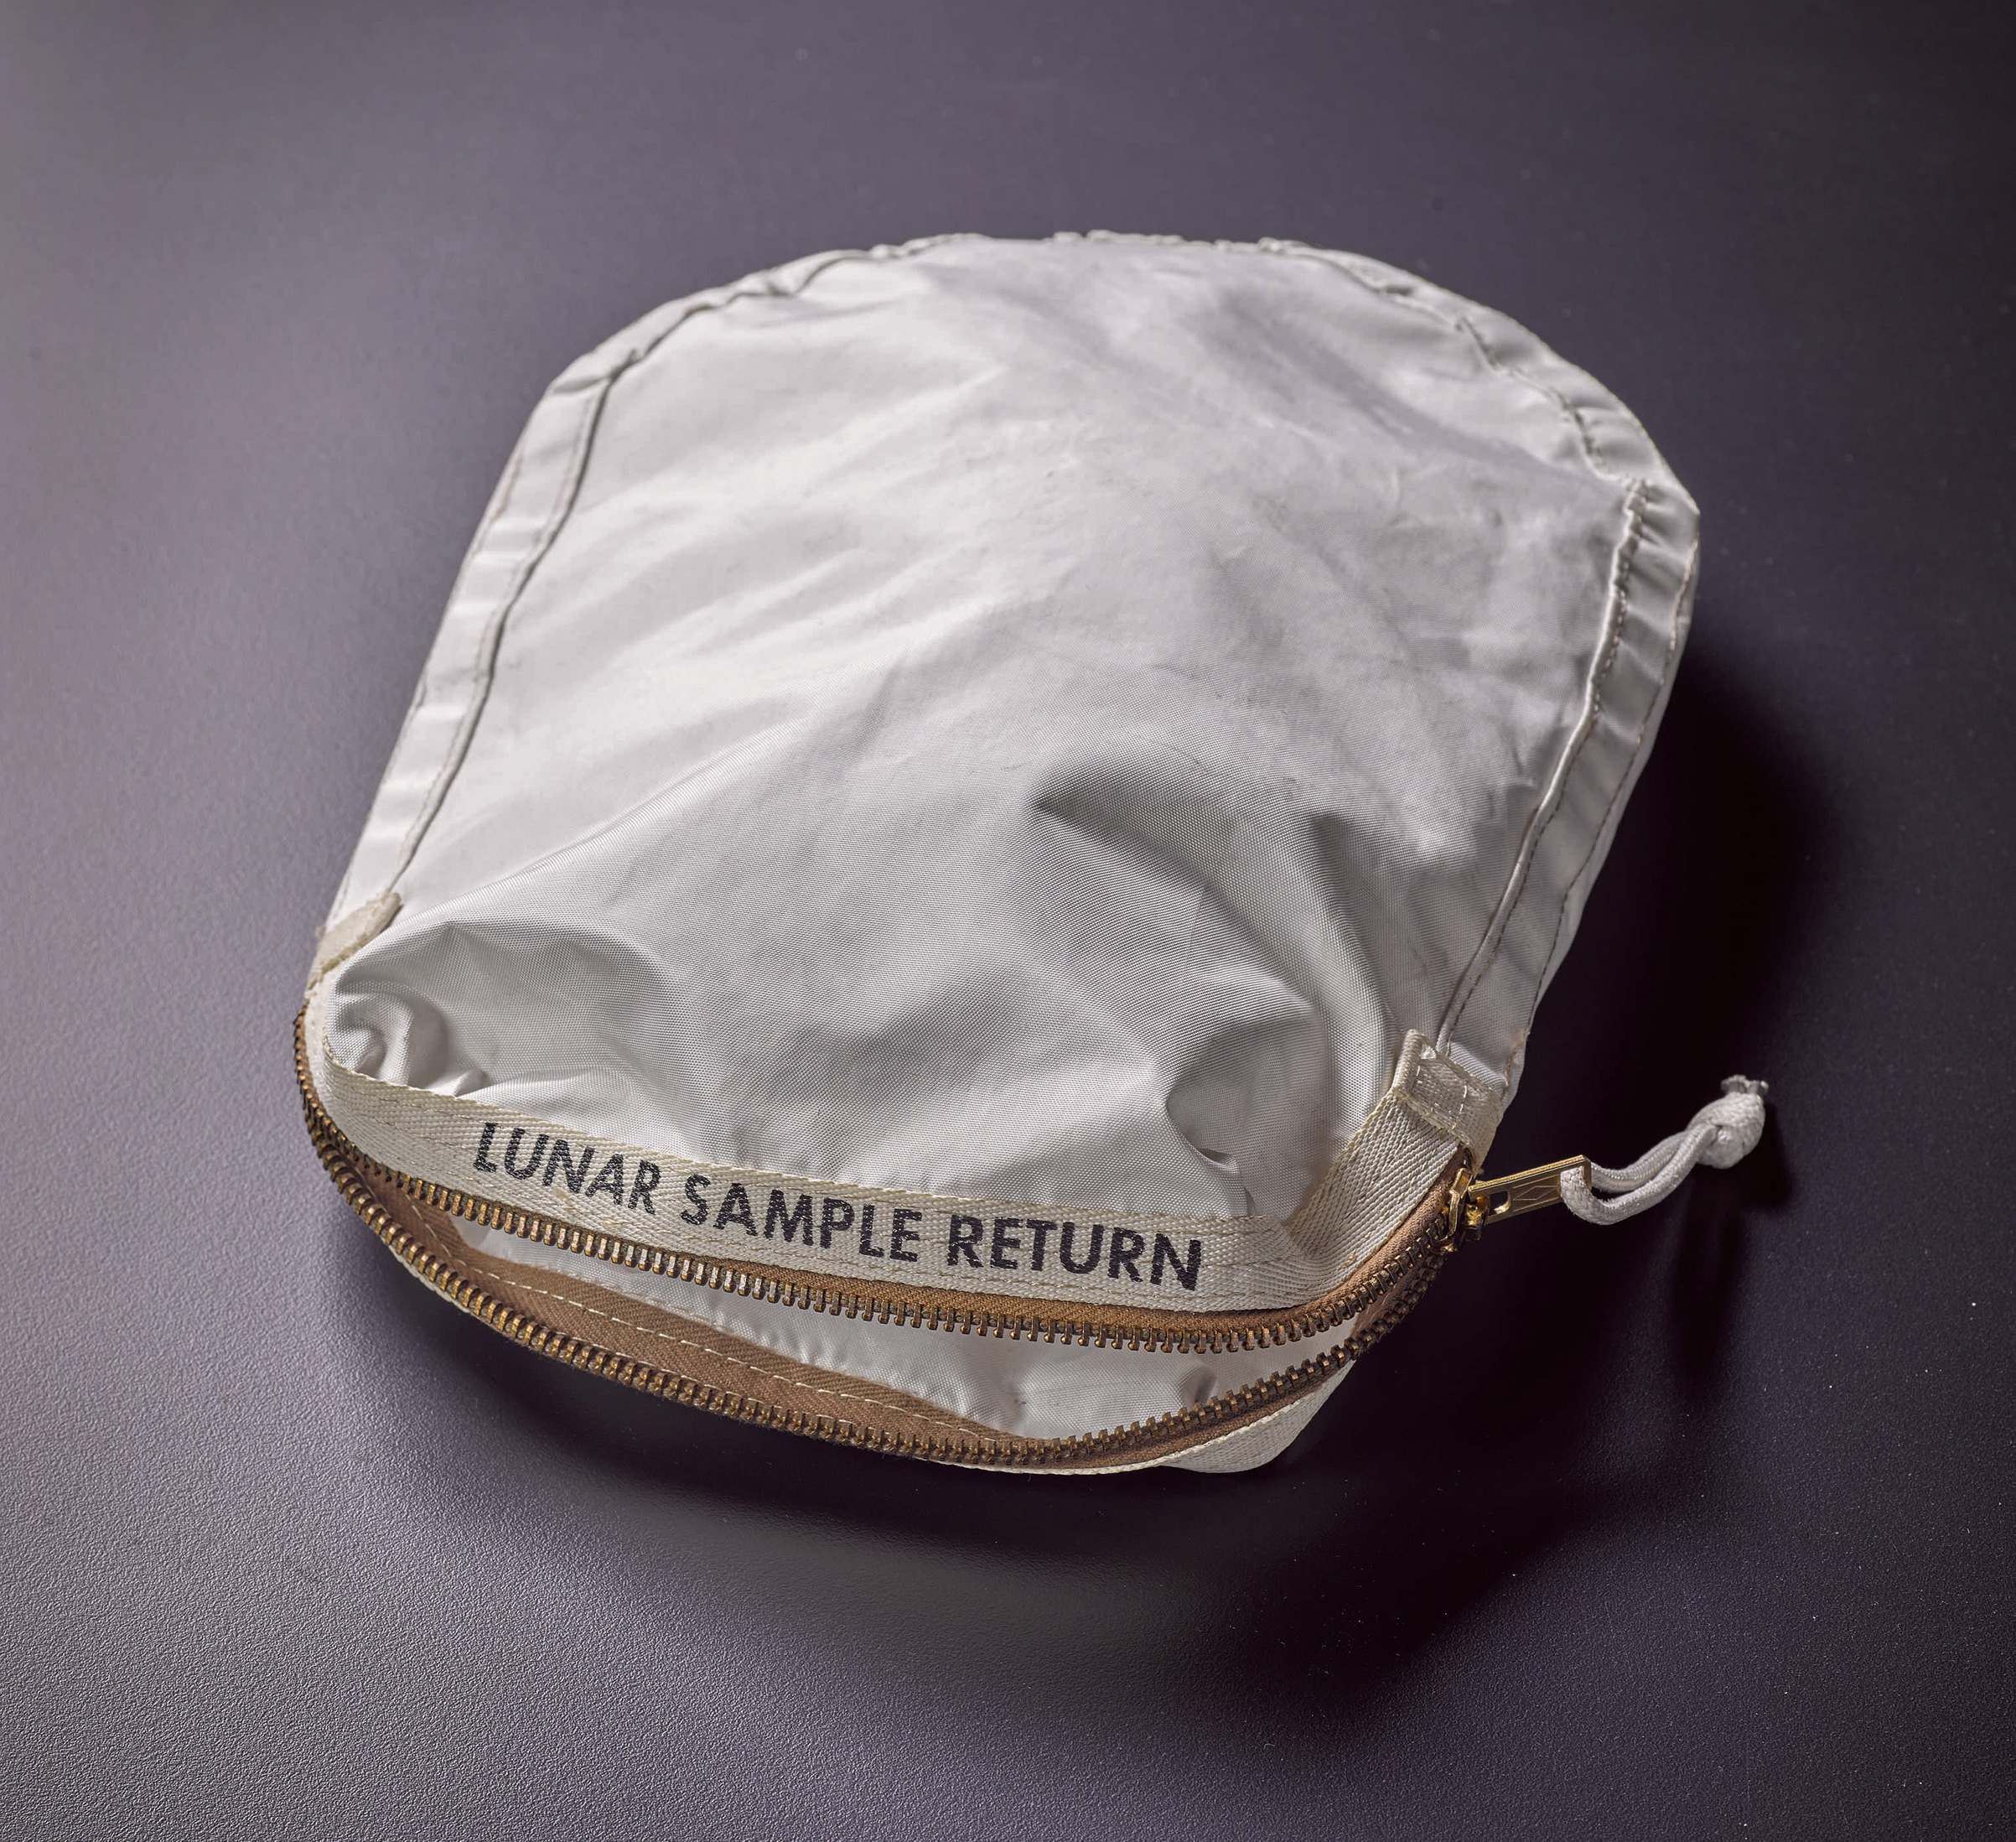 Apollo 11 Contingency Lunar Sample Return Bag. Used by Neil Armstrong on Apollo 11 to bring back the very first pieces of the moon ever collected, traces of which remain in the bag. (Courtesy of Sotheby's)